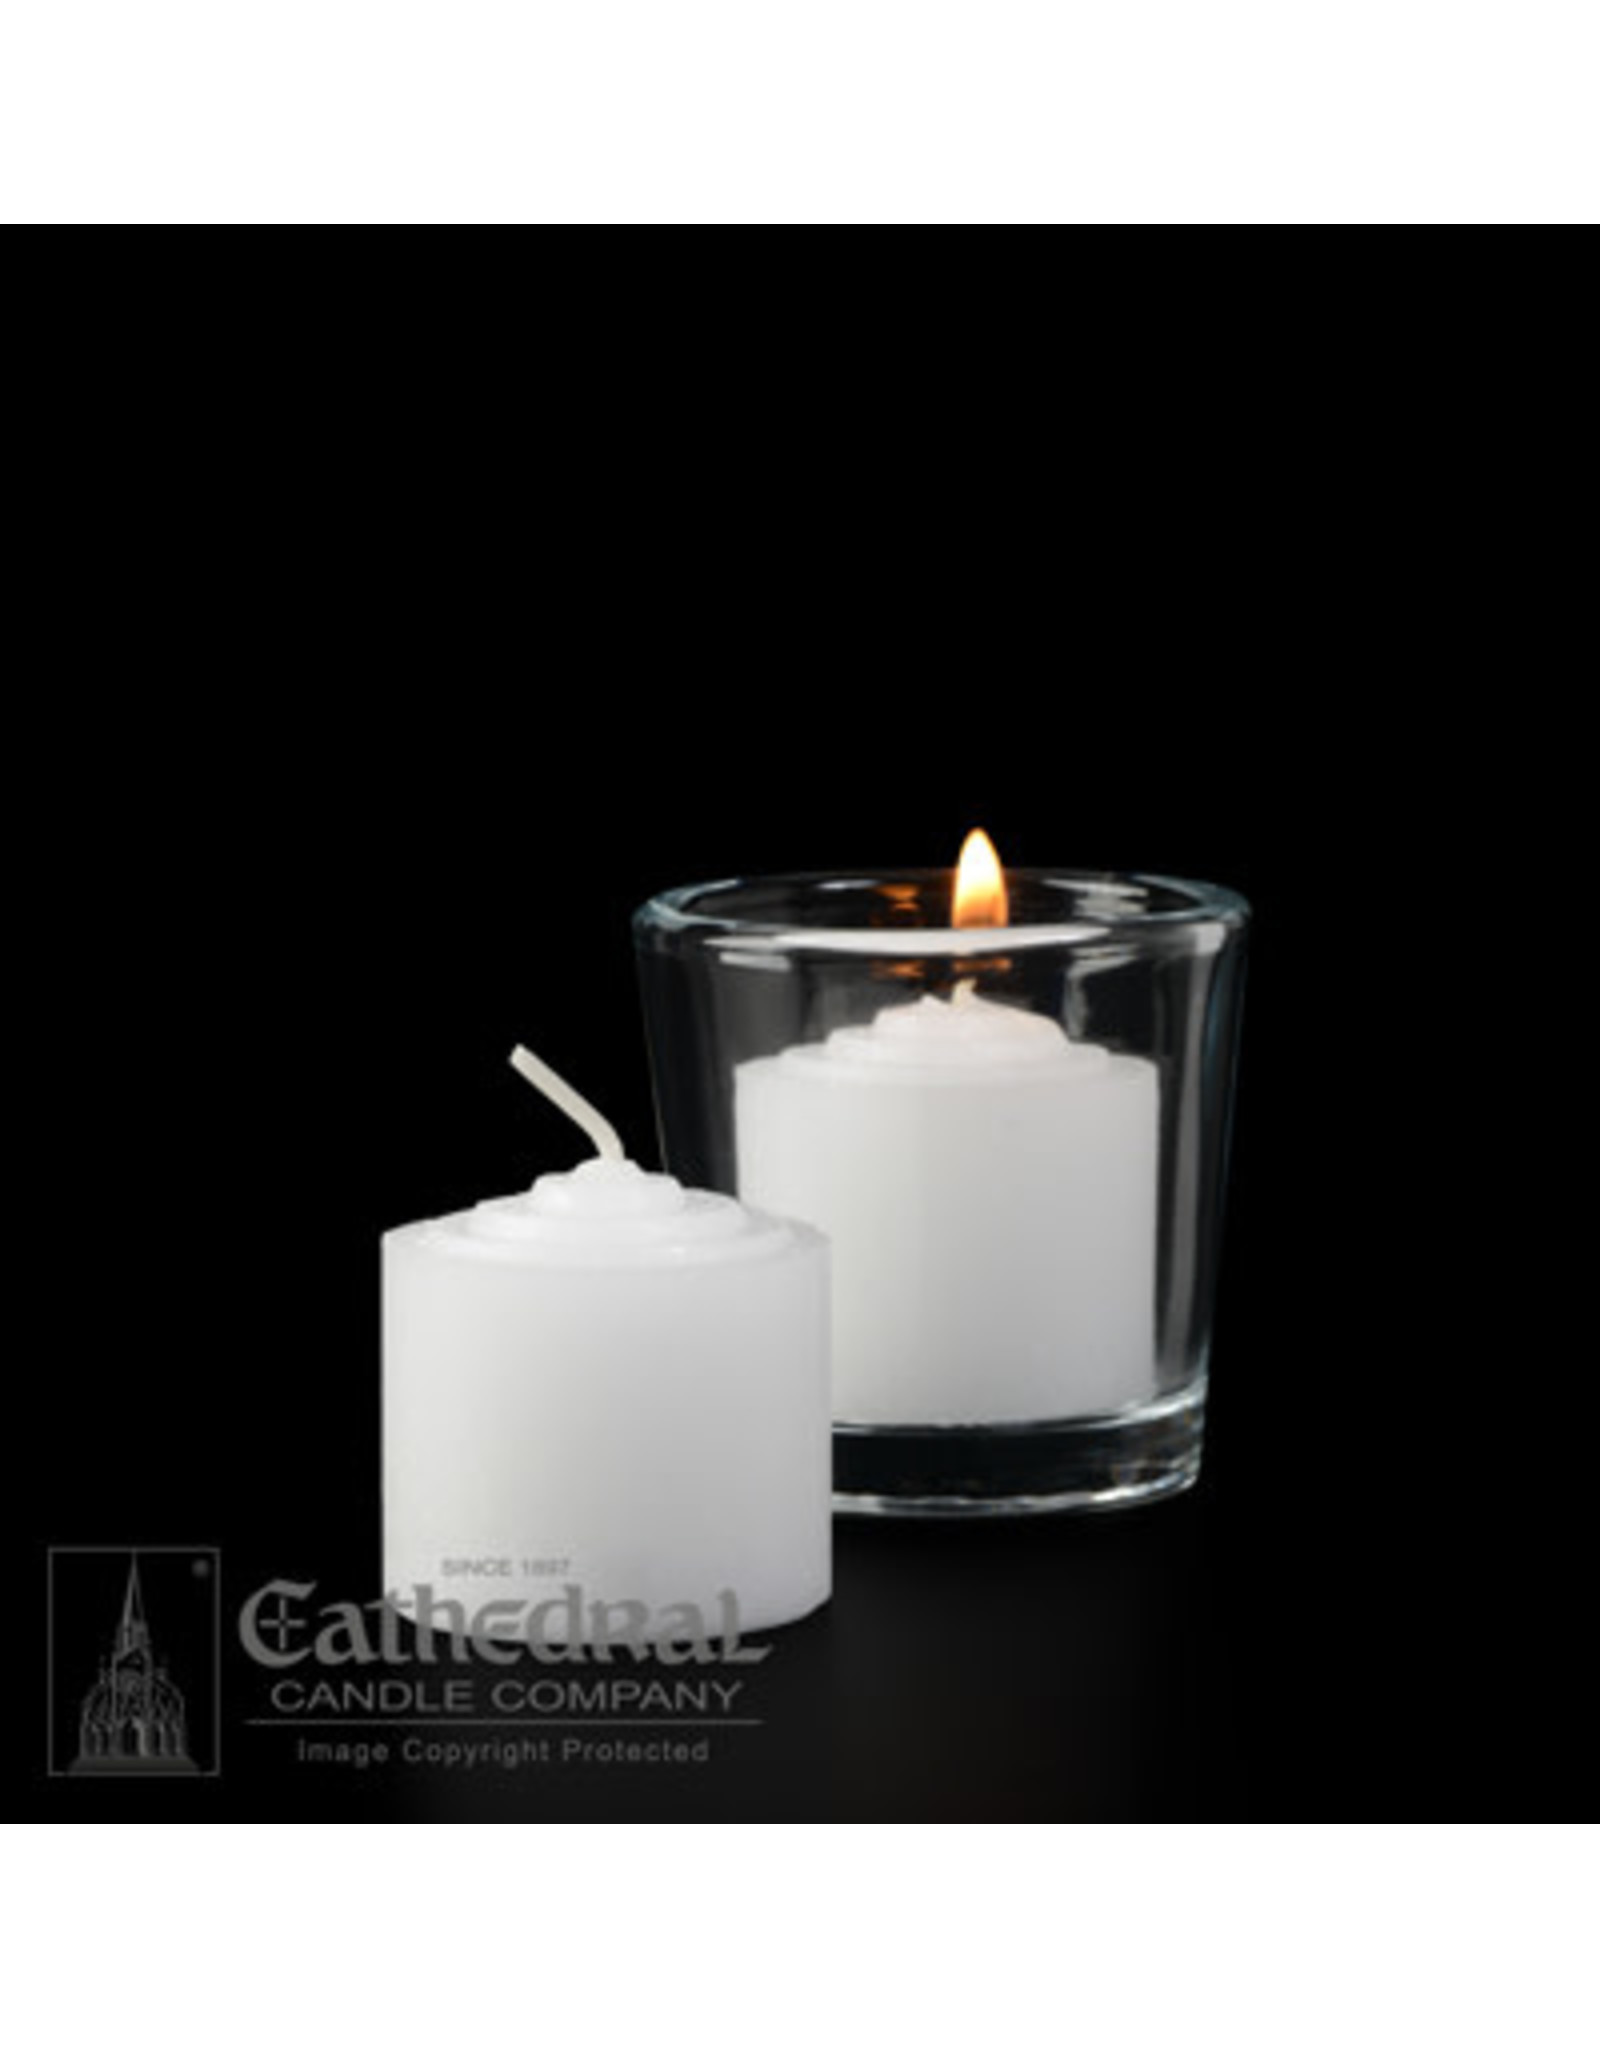 Cathedral Candle 8-Hour Votive Candles (Case of 4 Boxes)